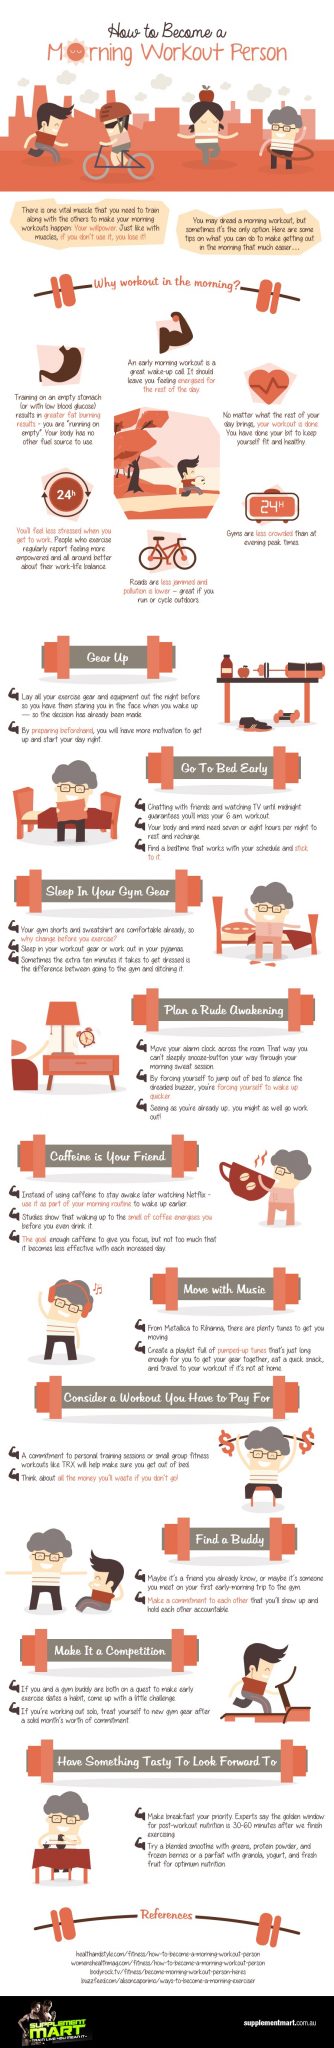 how to become a morning workout person